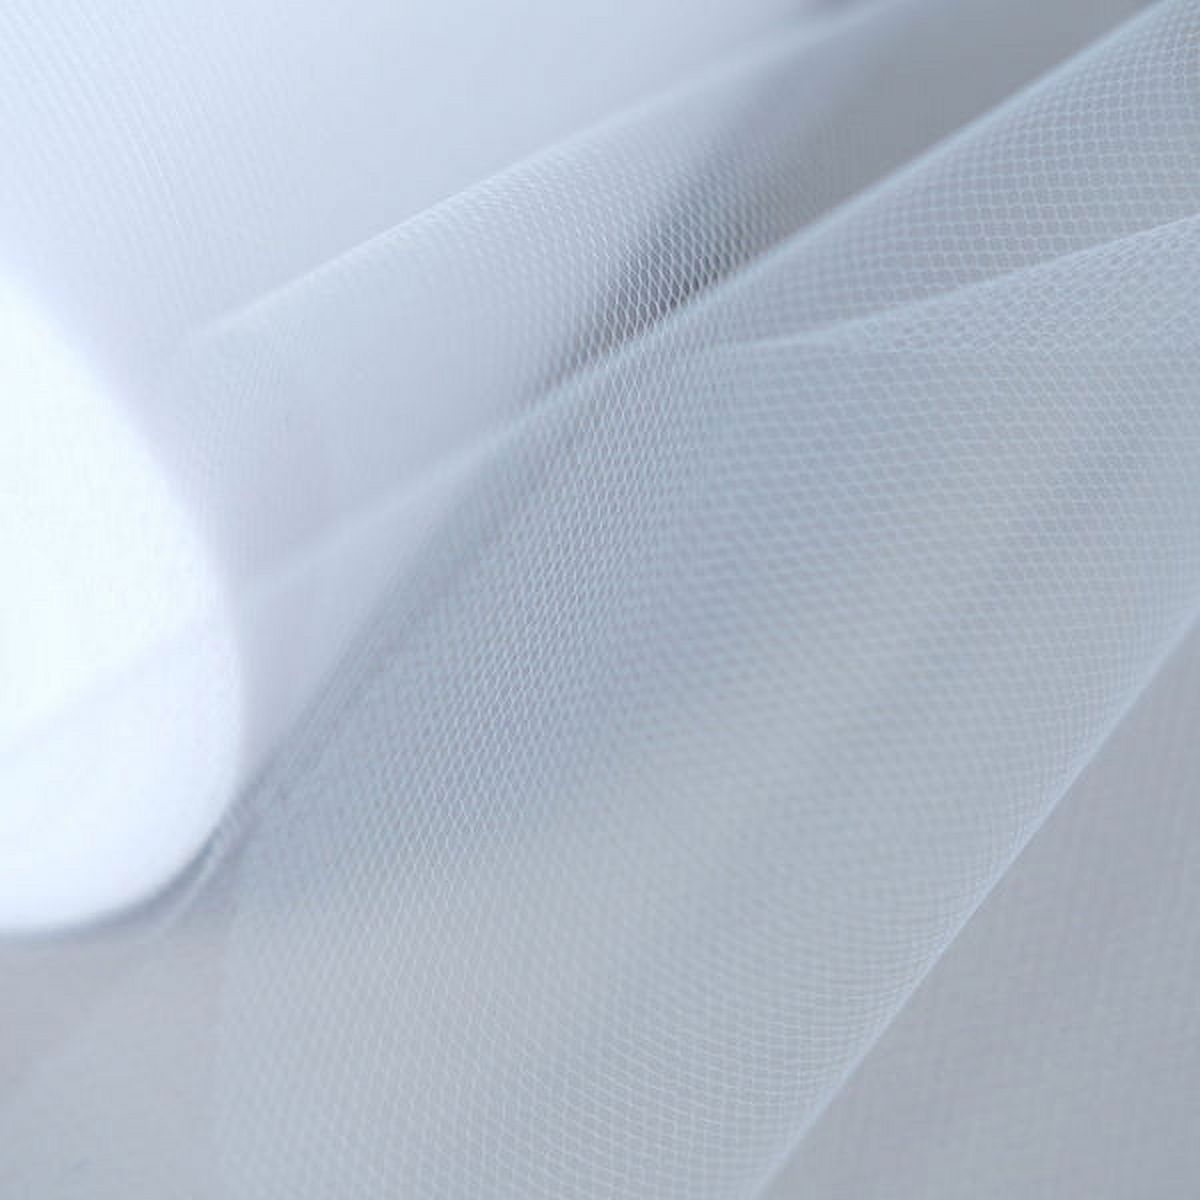 Efavormart 6 inchx100 Yards White Tulle Fabric Bolt, Sheer Fabric Spool Roll for Crafts